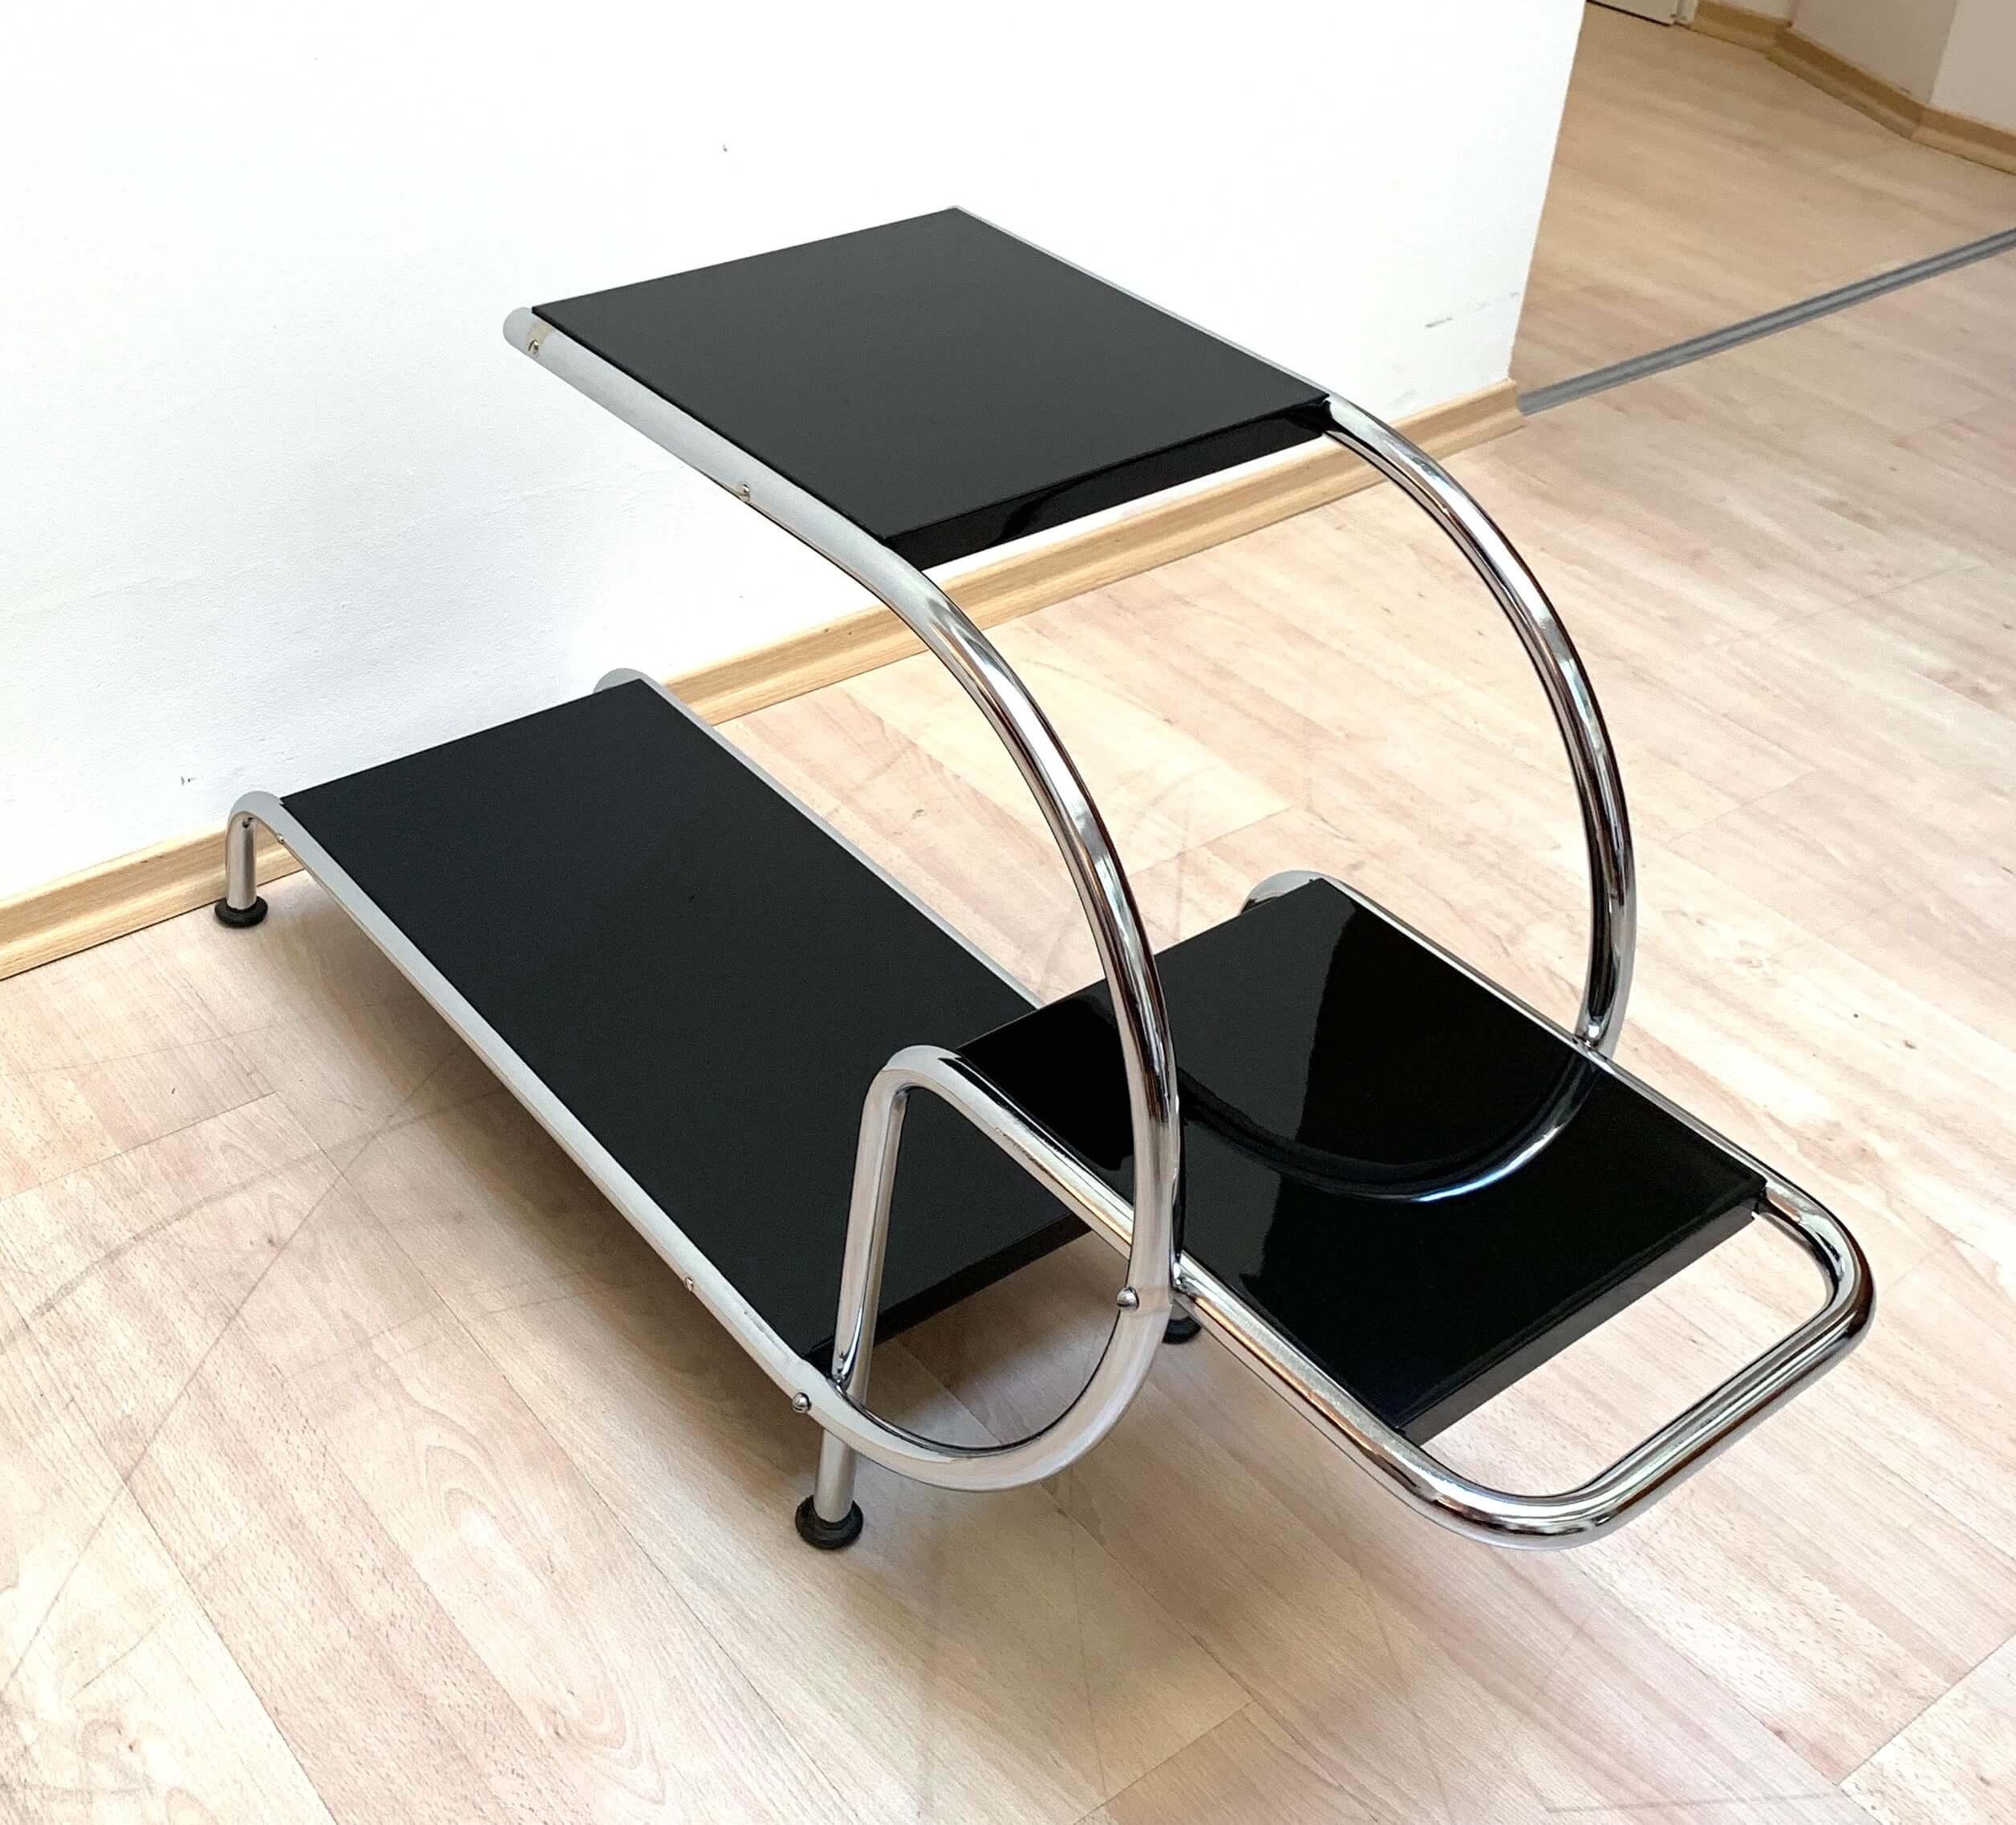 Mid-20th Century Bauhaus Steeltube Étagère, Nickel and Black Lacquer, Germany/Czechia, 1930s For Sale